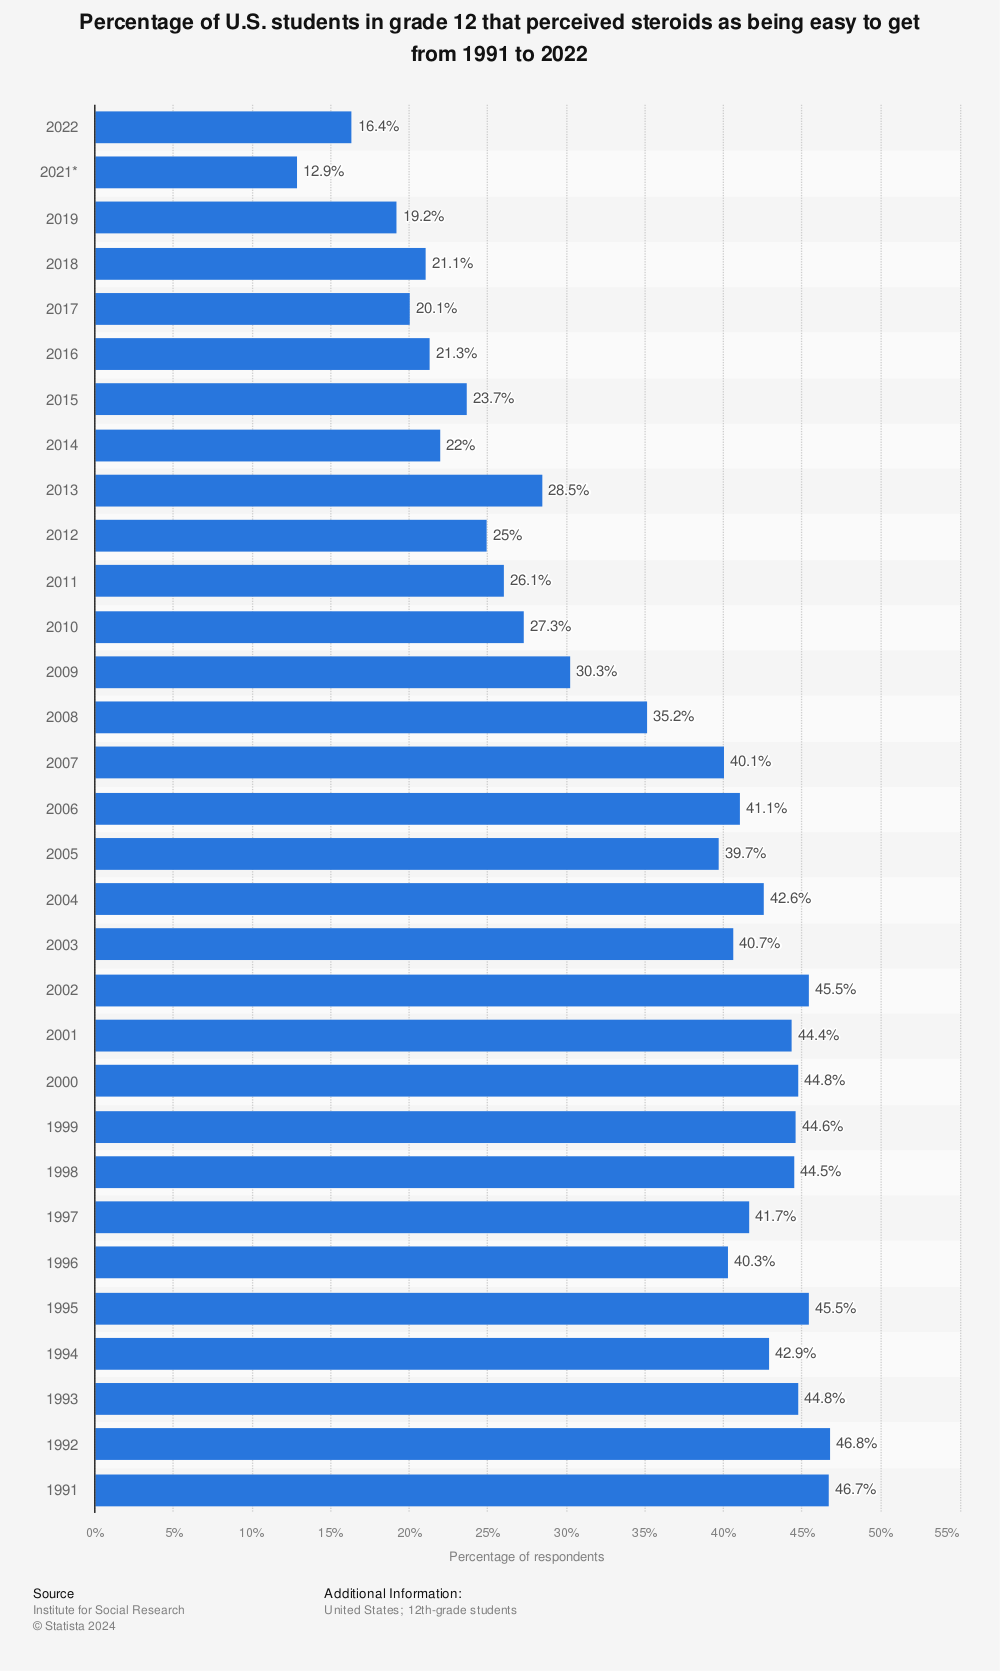 Statistic: Percentage of U.S. students in grade 12 that perceived steroids as being easy to get from 1991 to 2021 | Statista